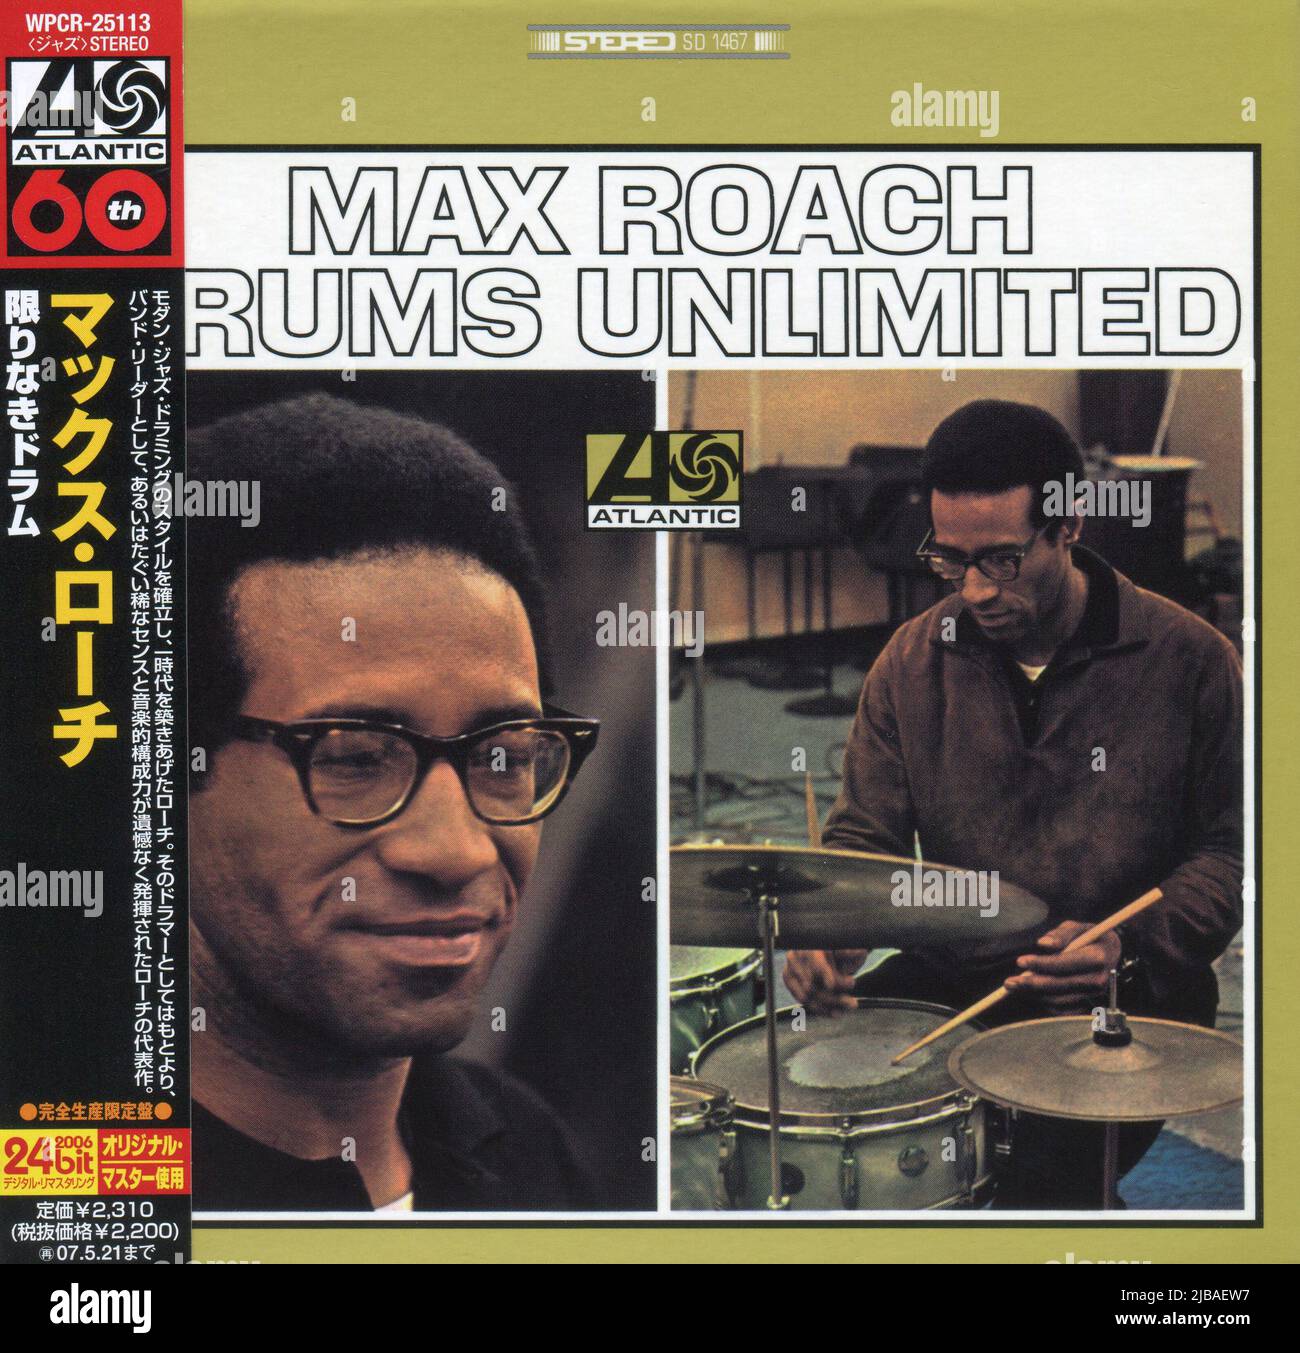 CD: Max Roach  DRUMS UNLIMITED (WPCR-25113) Promo, Released: 22 november 2006. Stock Photo